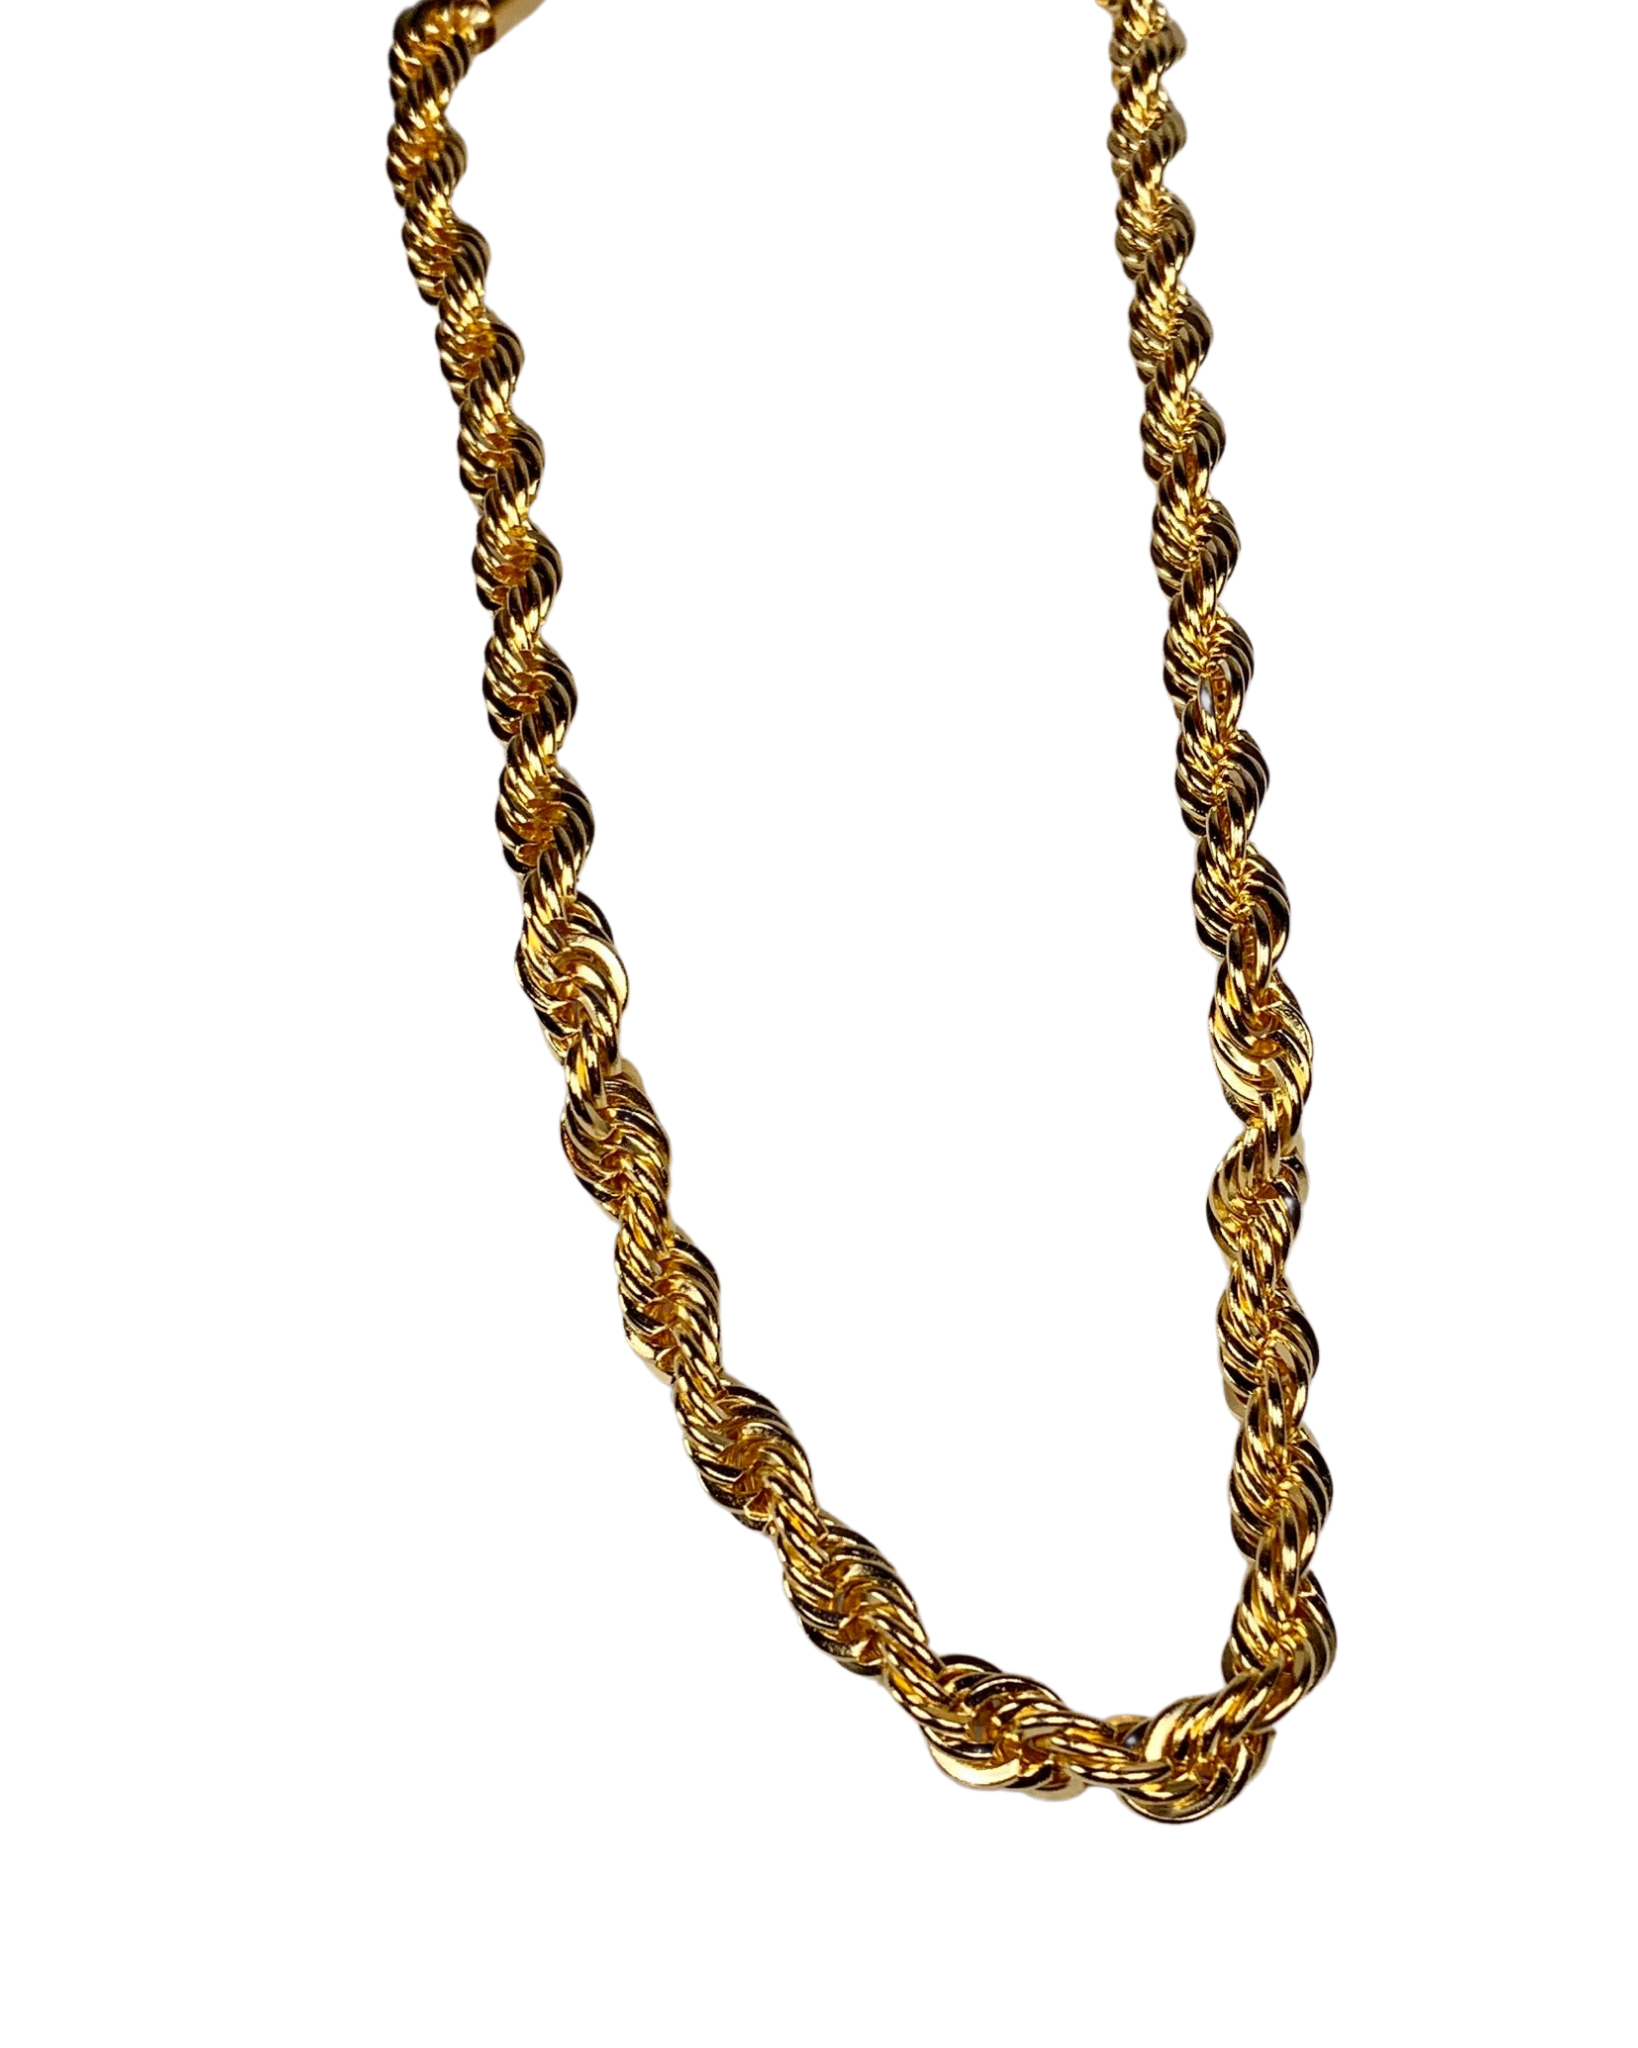 Susan Shaw Parker French Rope Chain.